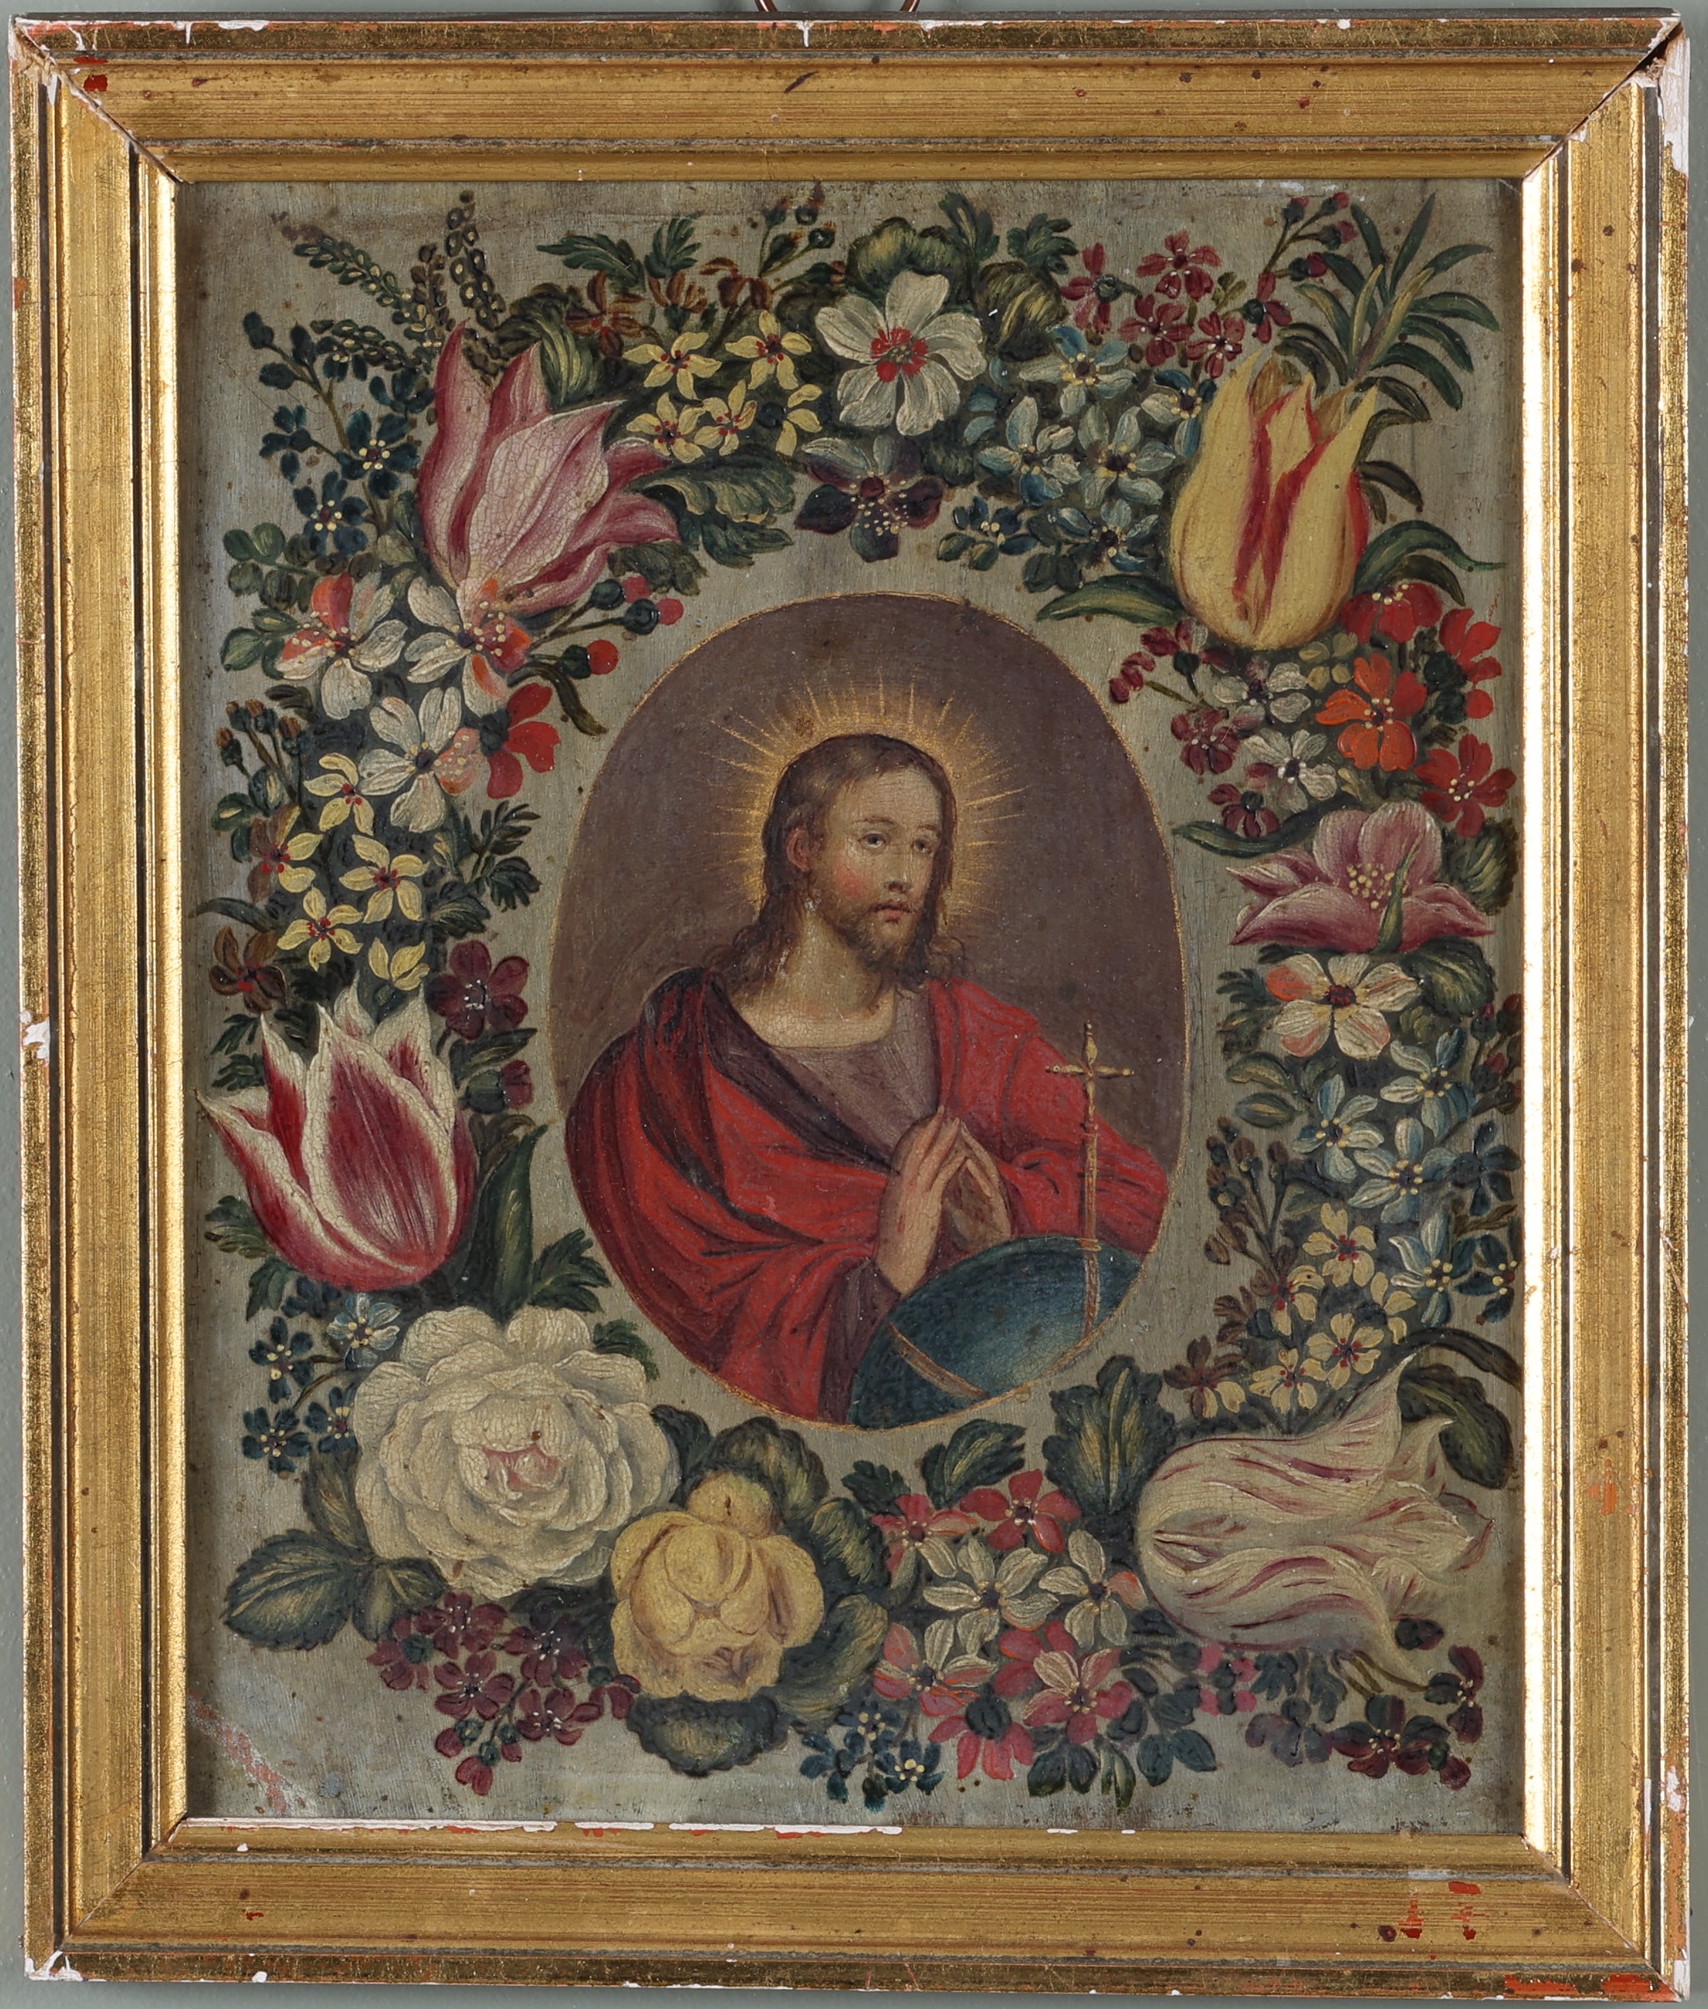 Circle of Jan Brueghel the Younger (1601-1678), 'Christ Surrounded by Flowers,' Oil On Copper